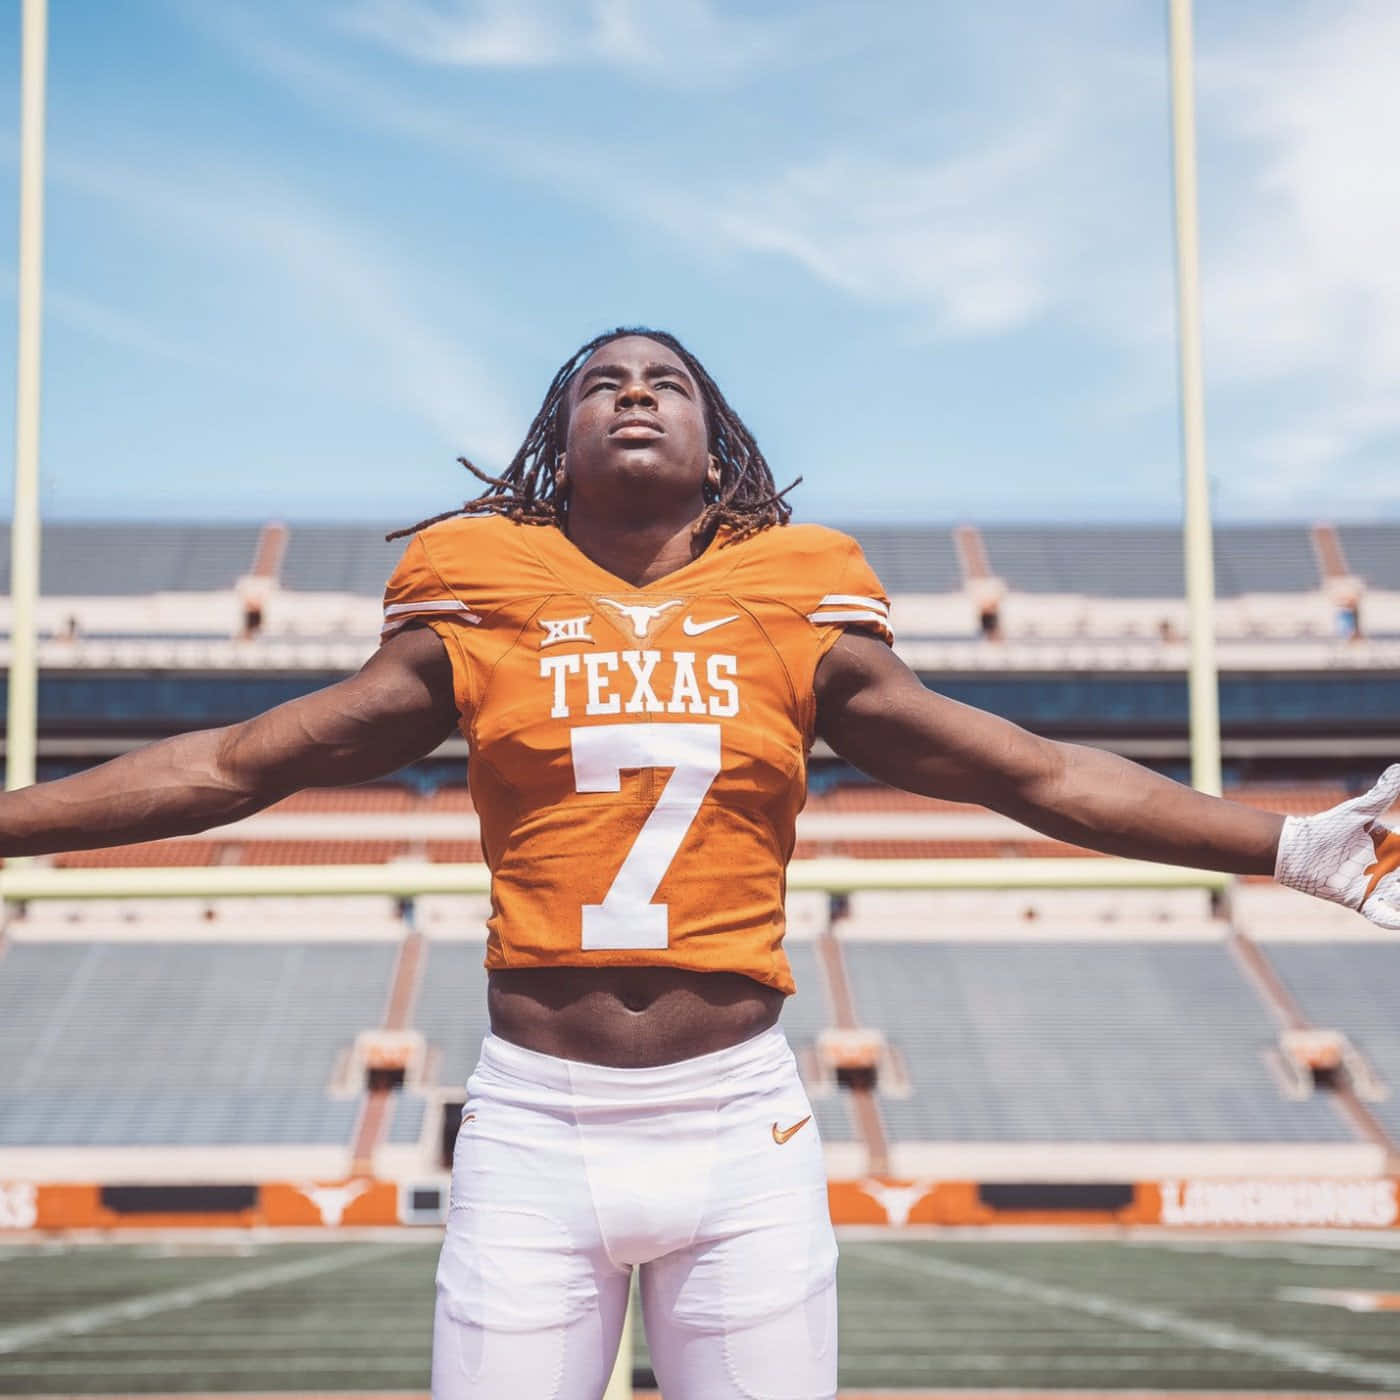 Texas Football Player Number7 Power Pose Wallpaper